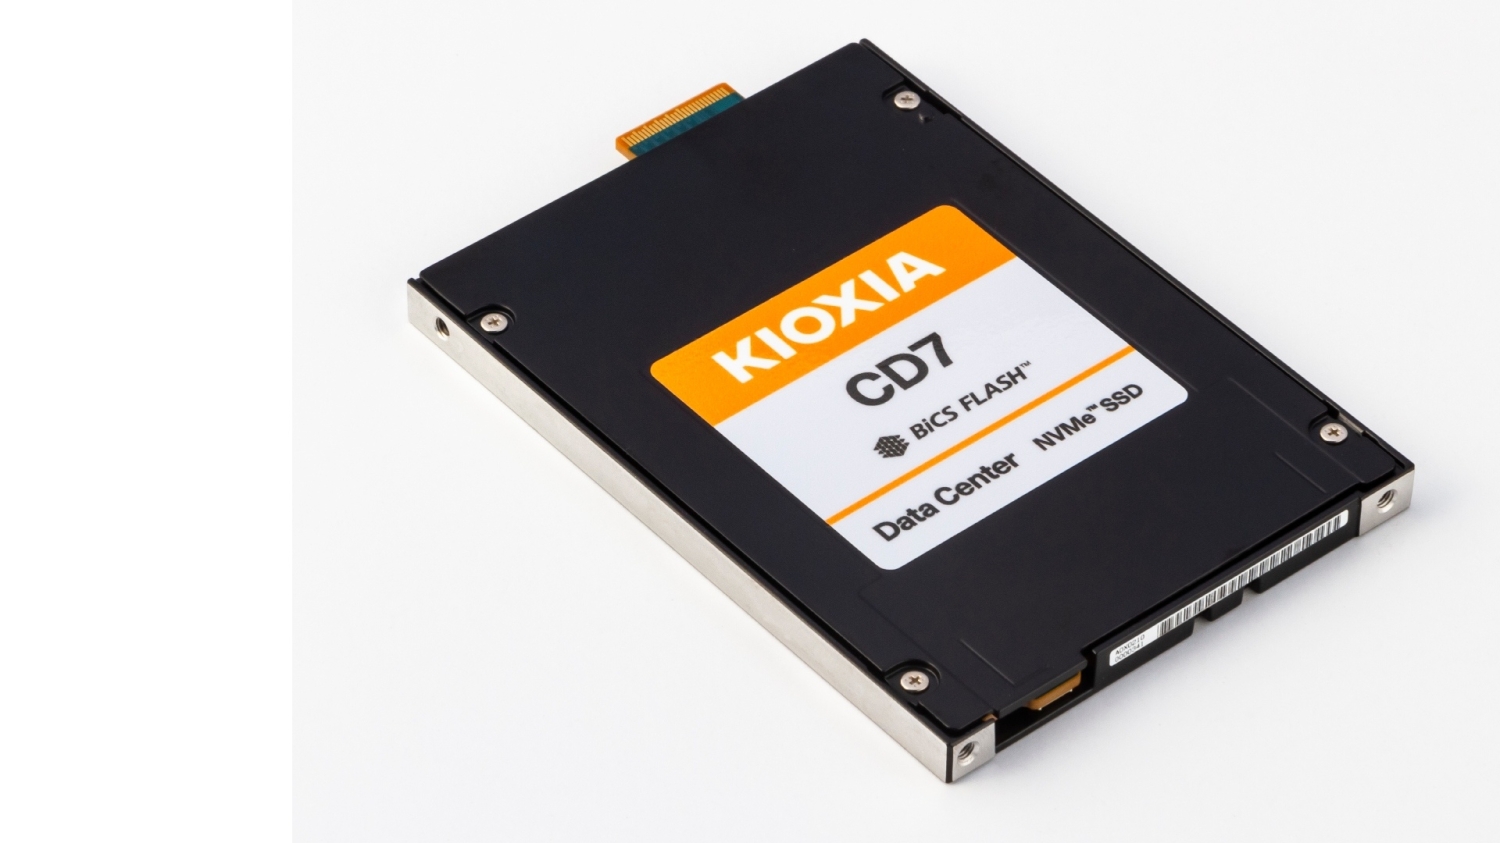 TweakTown Enlarged Image - KIOXIA CD7 E3.S SSDs on select Hewlett Packard Enterprise (HPE) Systems, image credit: KIOXIA